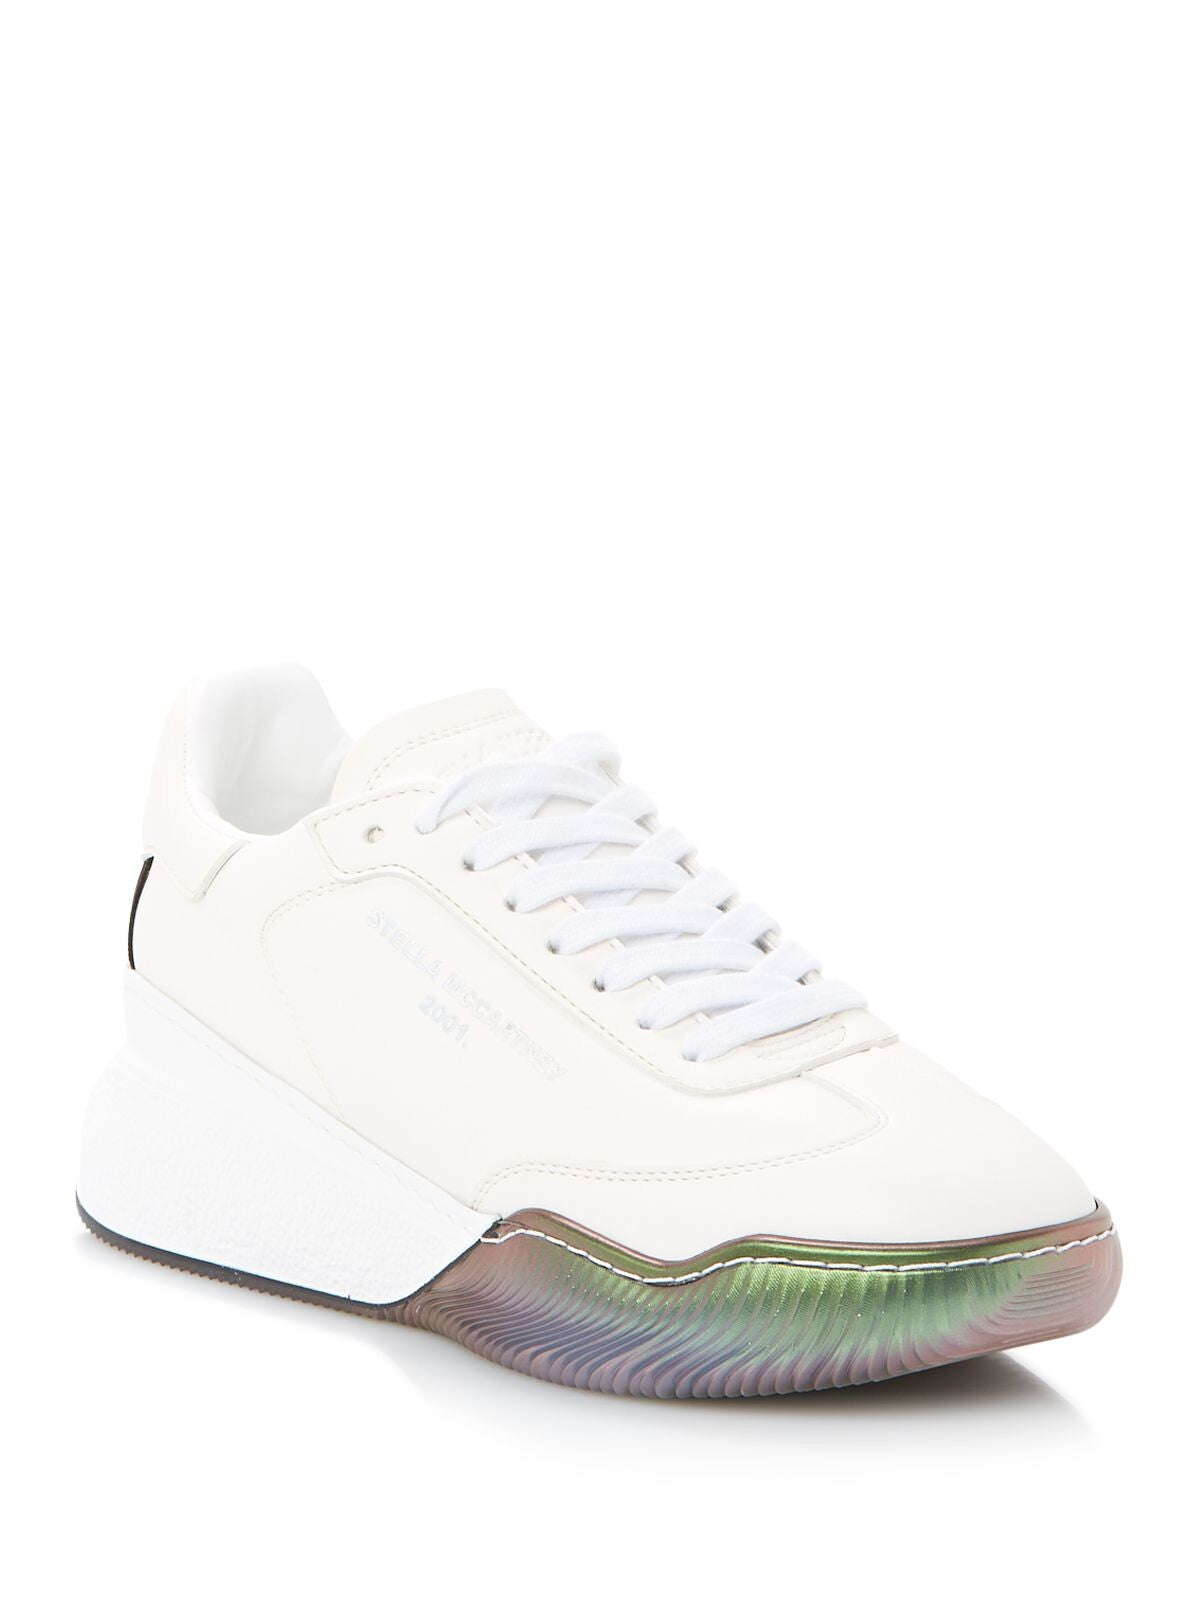 STELLAMCCARTNEY Womens White Iridescent Removable Insole Logo Loop Sm84 Round Toe Wedge Lace-Up Athletic Sneakers Shoes 38